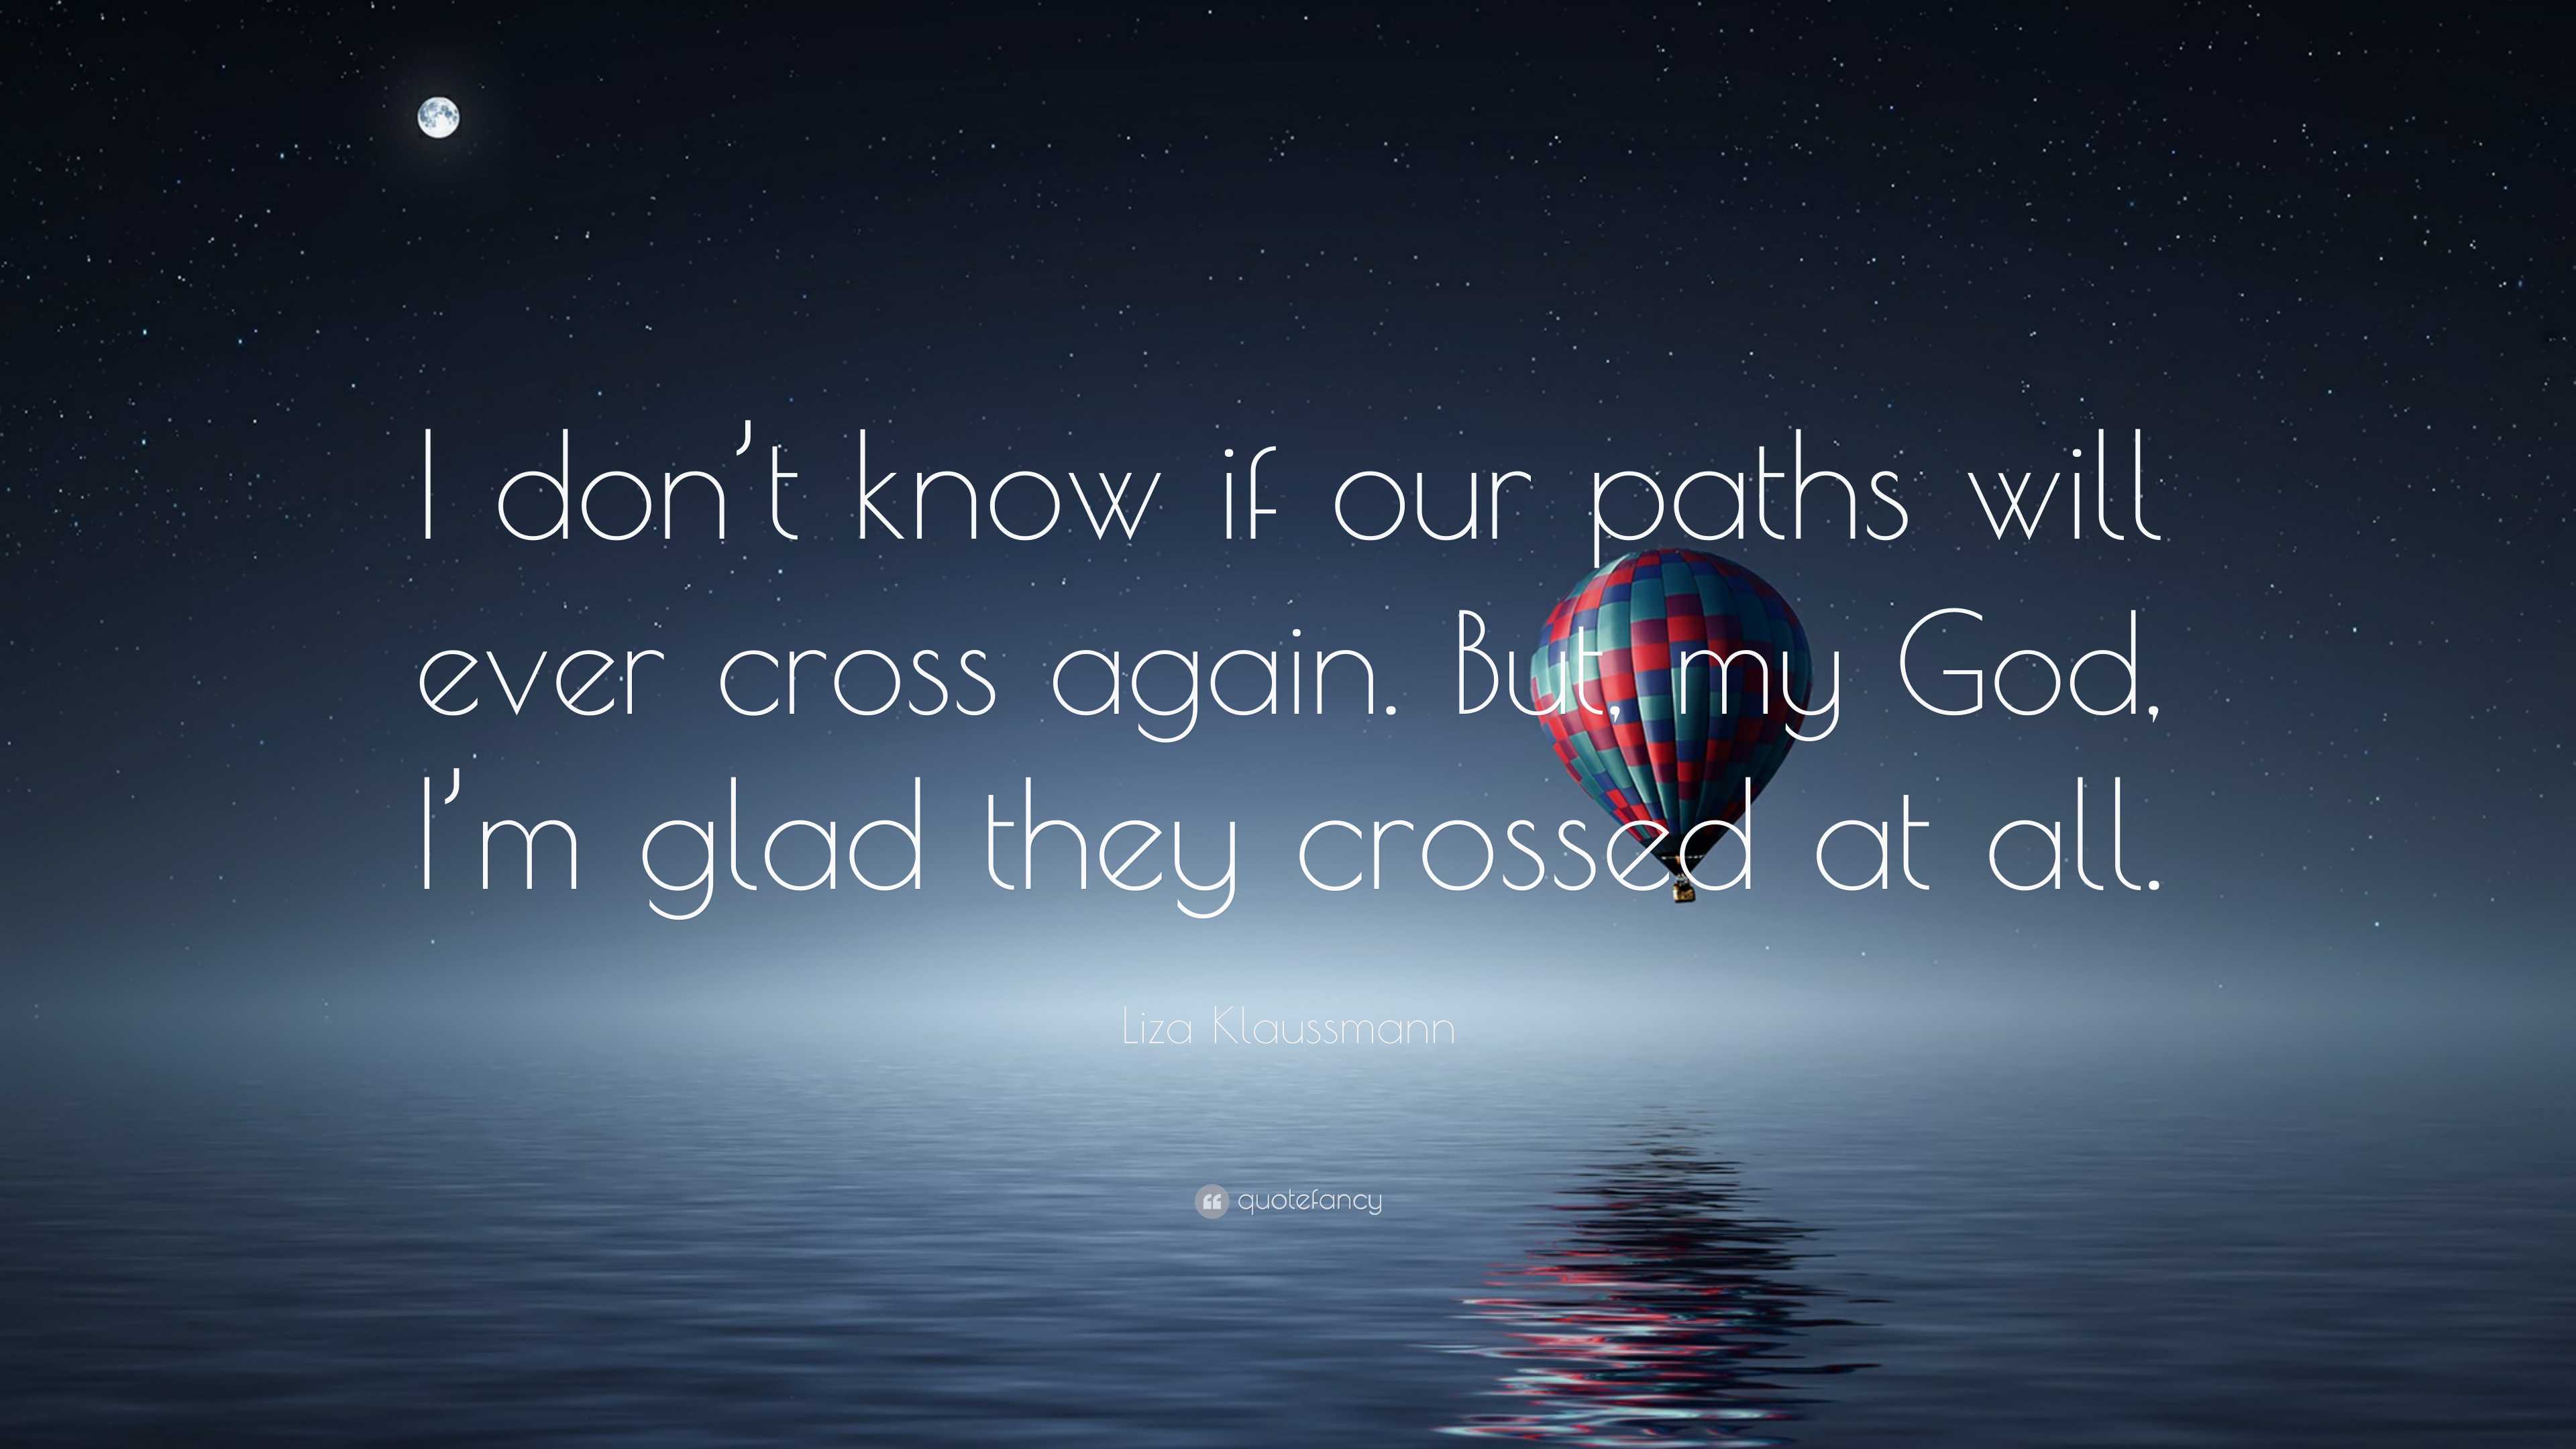 Liza Klaussmann Quote: “I don't know if our paths will ever cross again. But,  my